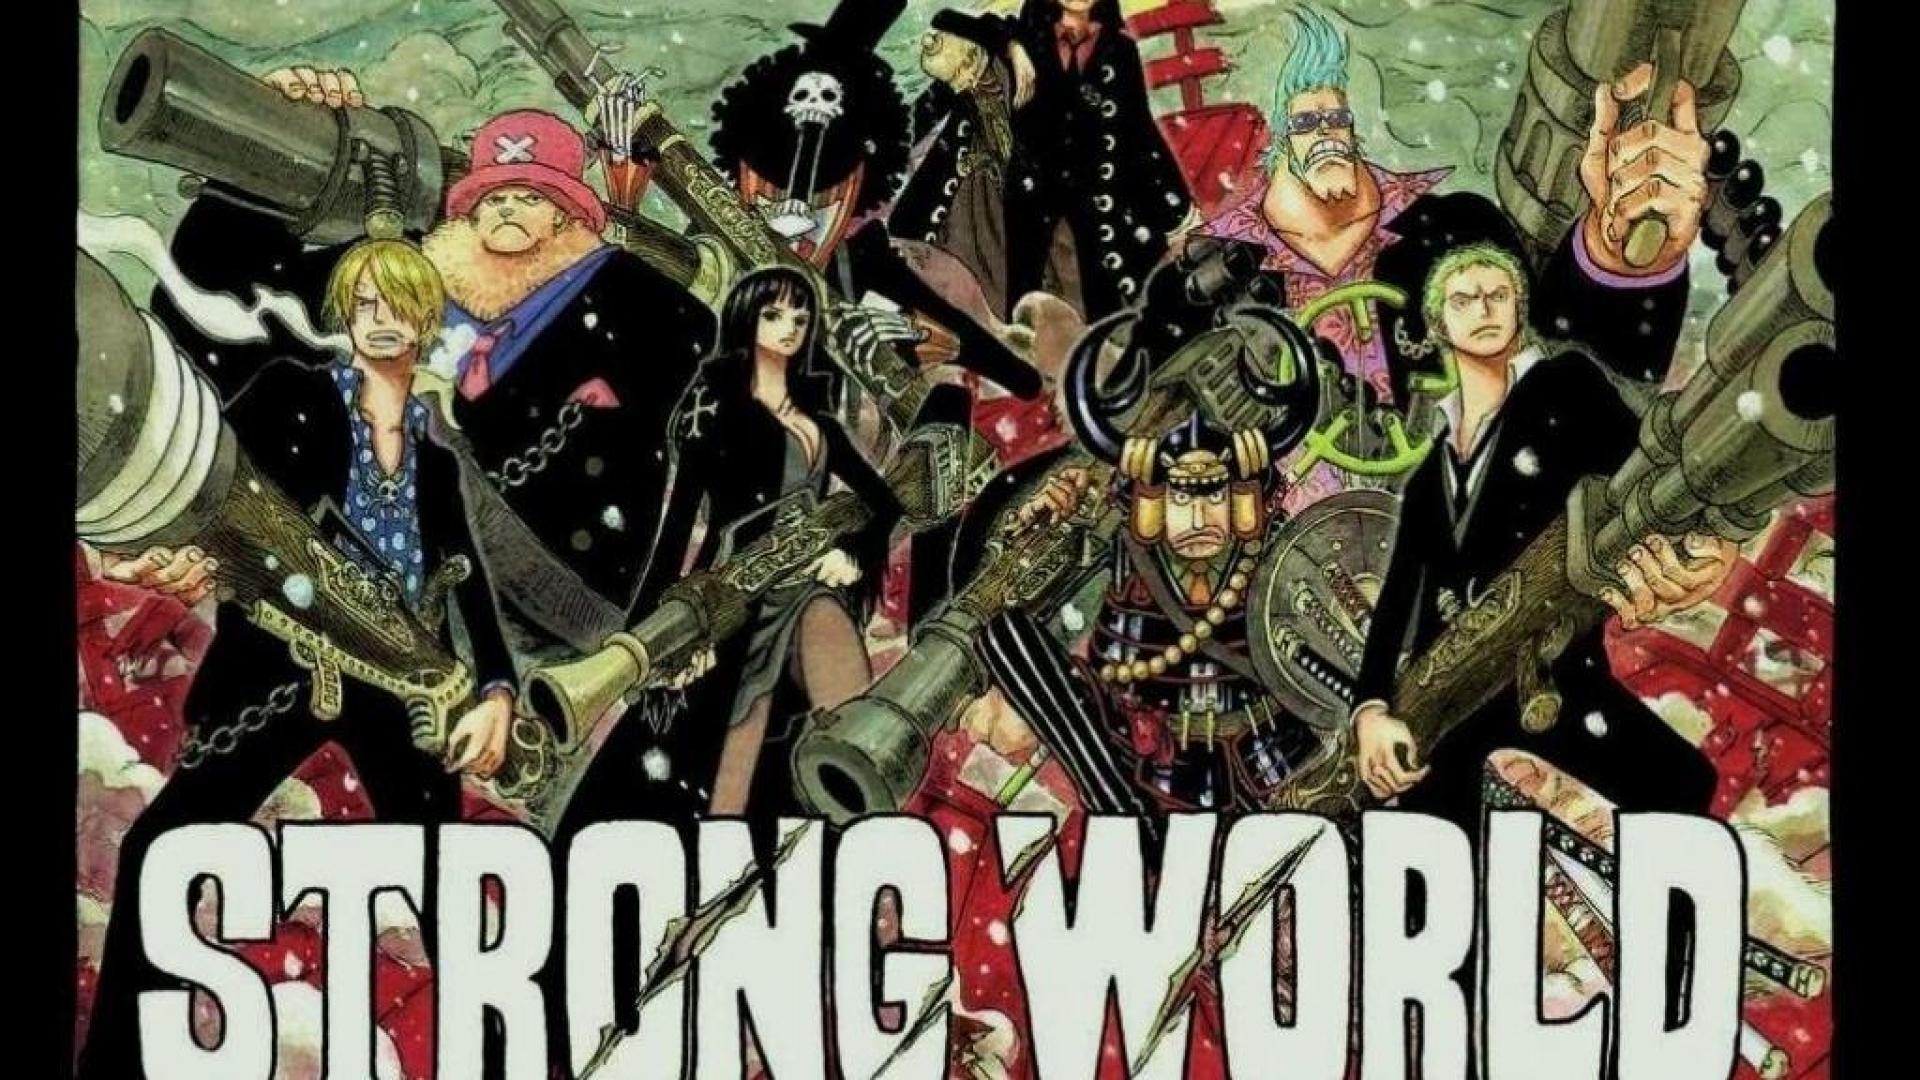 one piece wallpaper hd new world,poster,movie,comics,album cover,fiction